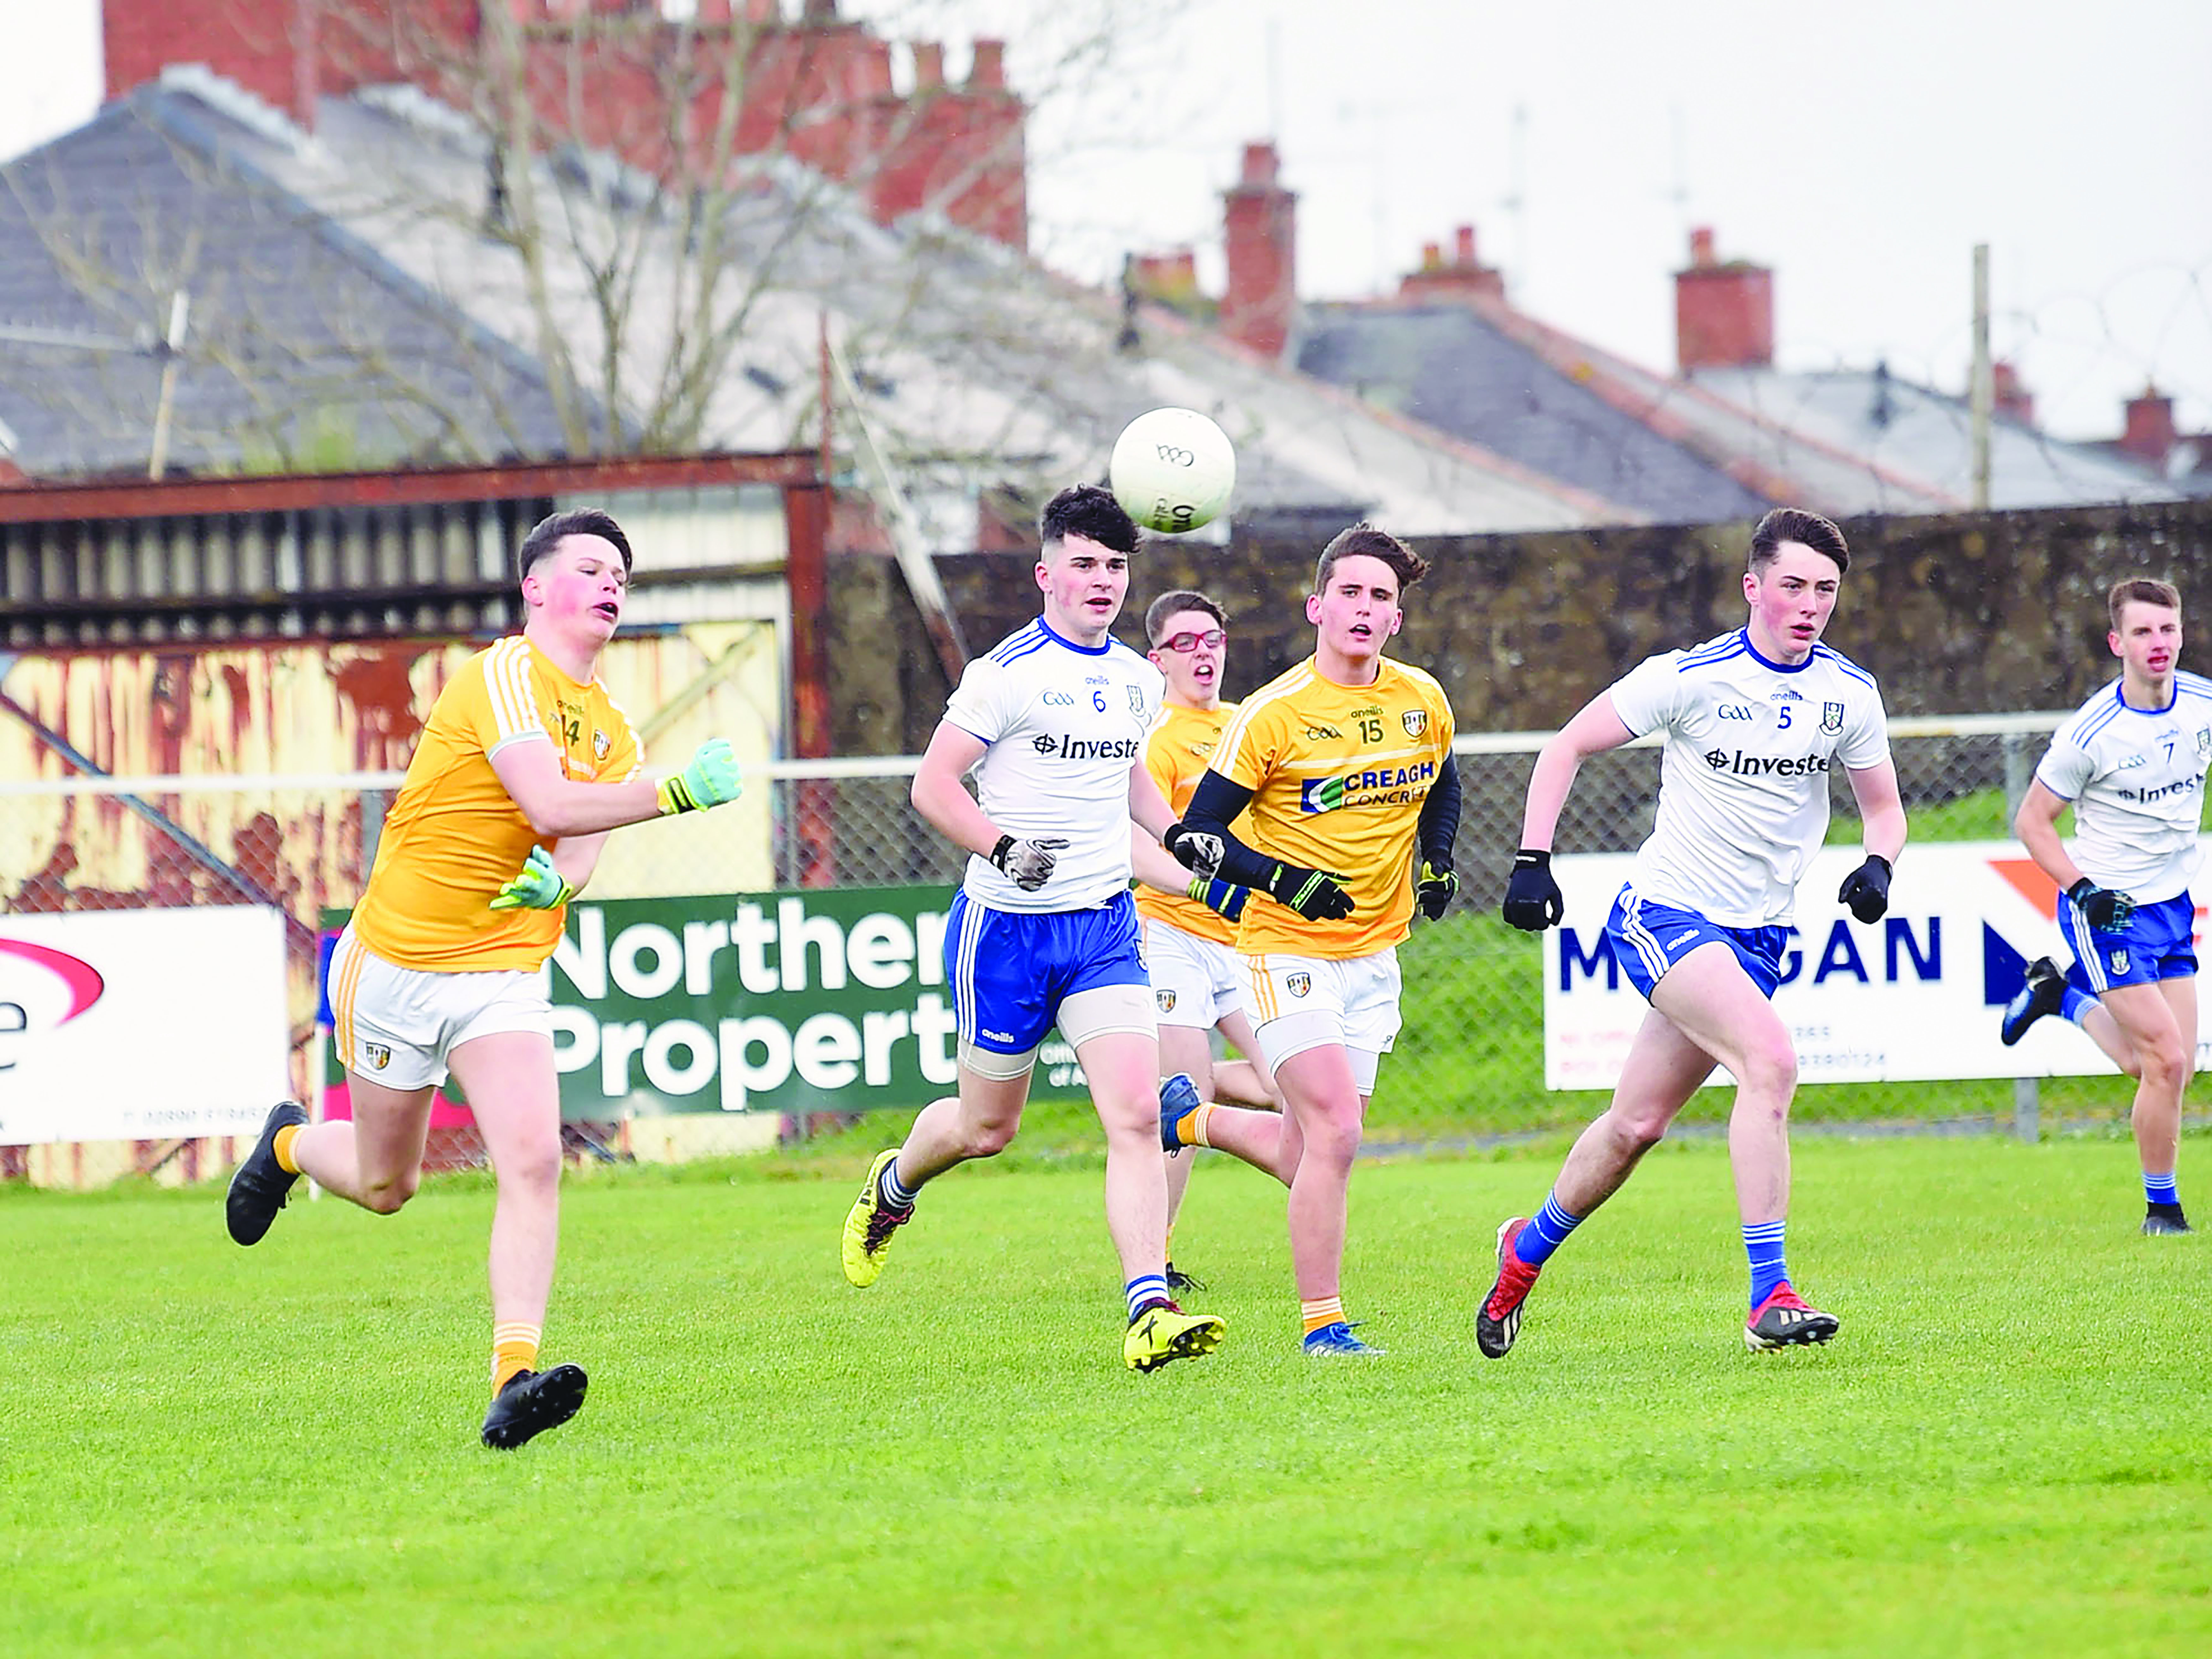 Antrim came up just short against Monaghan at the same stage of last year’s Ulster MFC